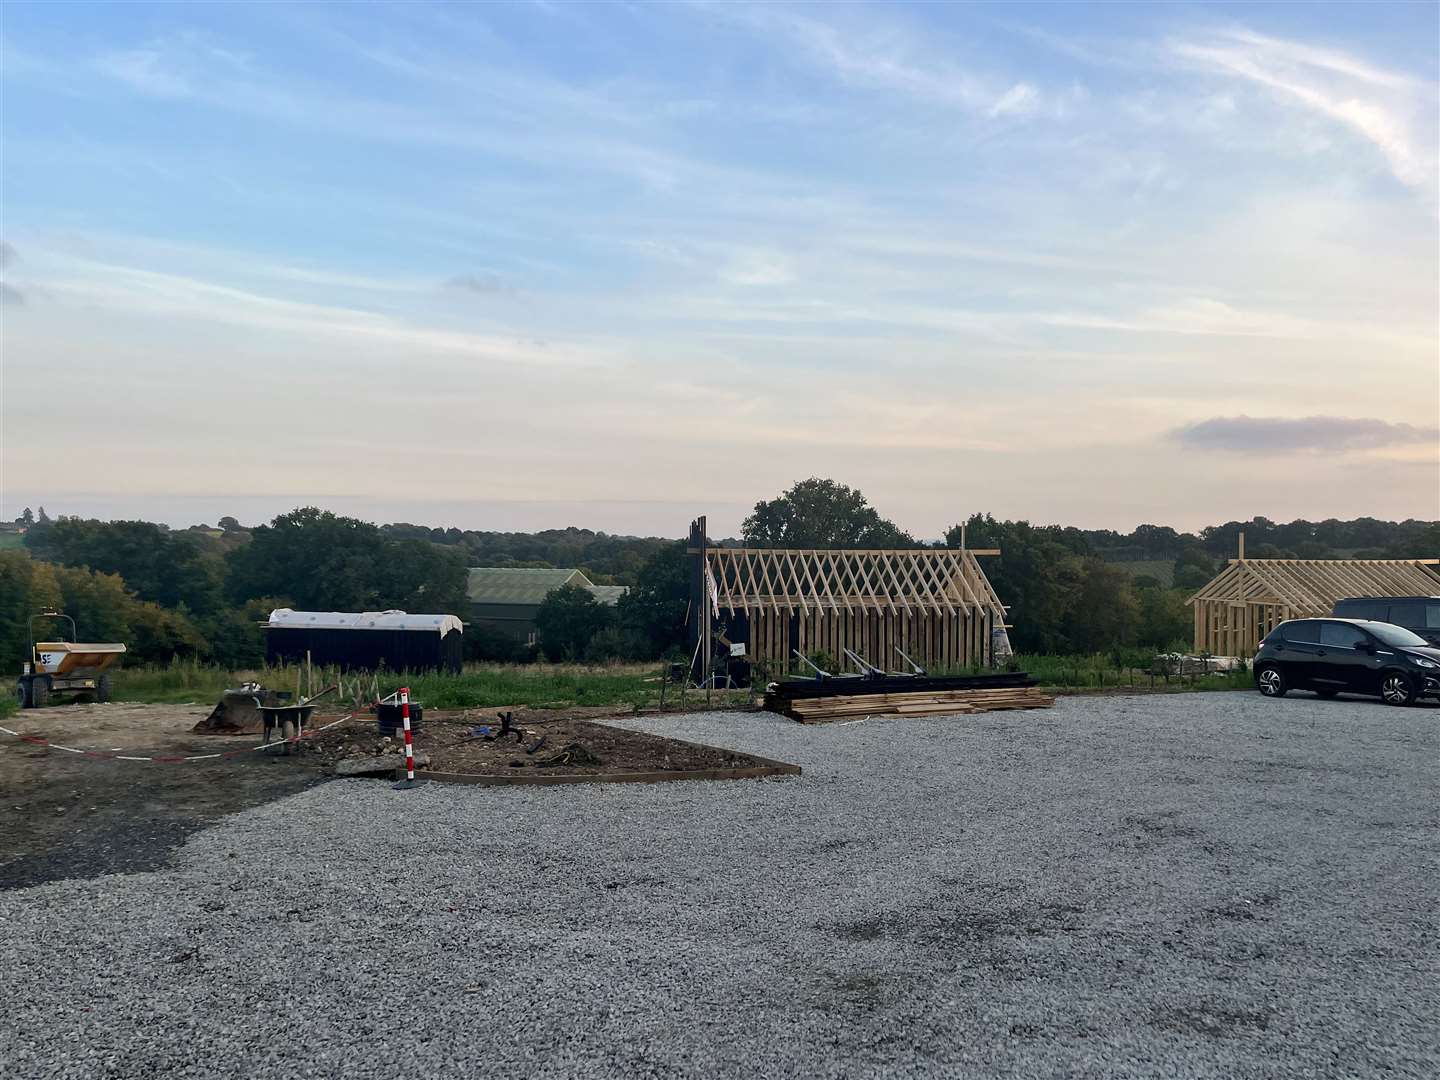 The site is also set to offer glamping which is yet to open